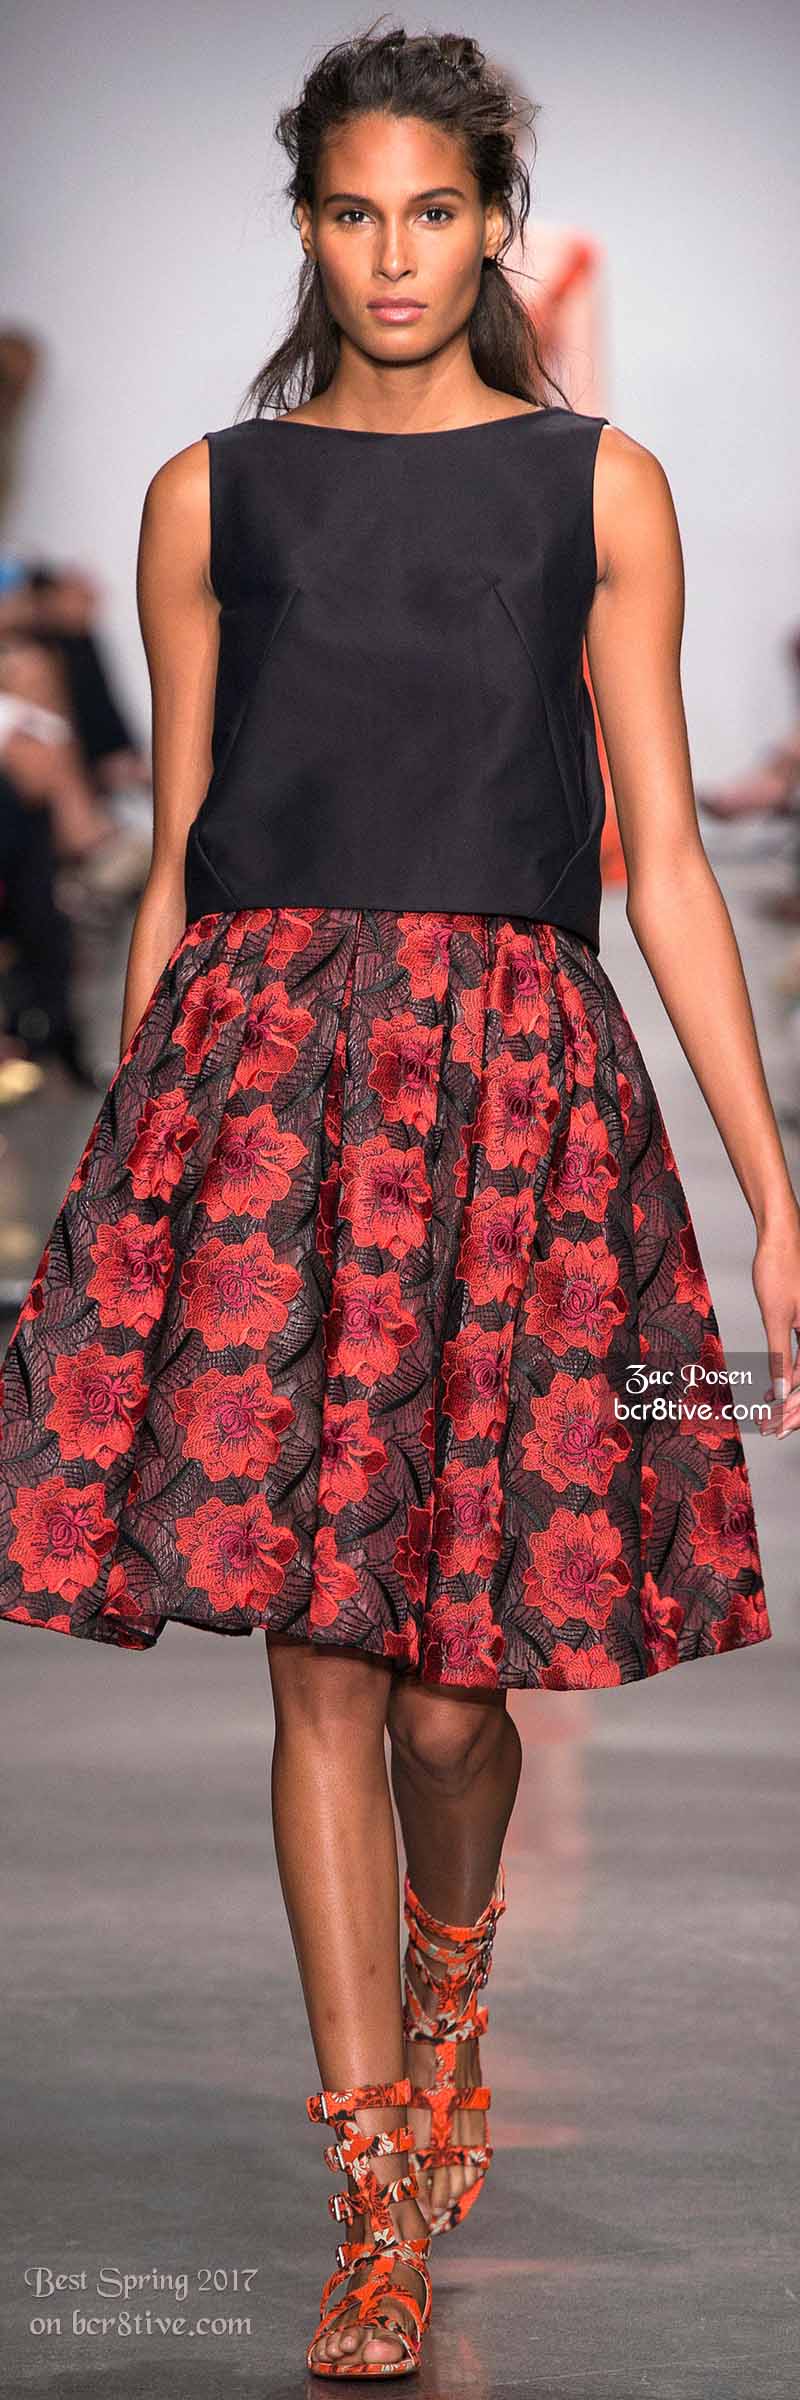 Zac Posen - The Best Looks from New York Fashion Week Spring 2017